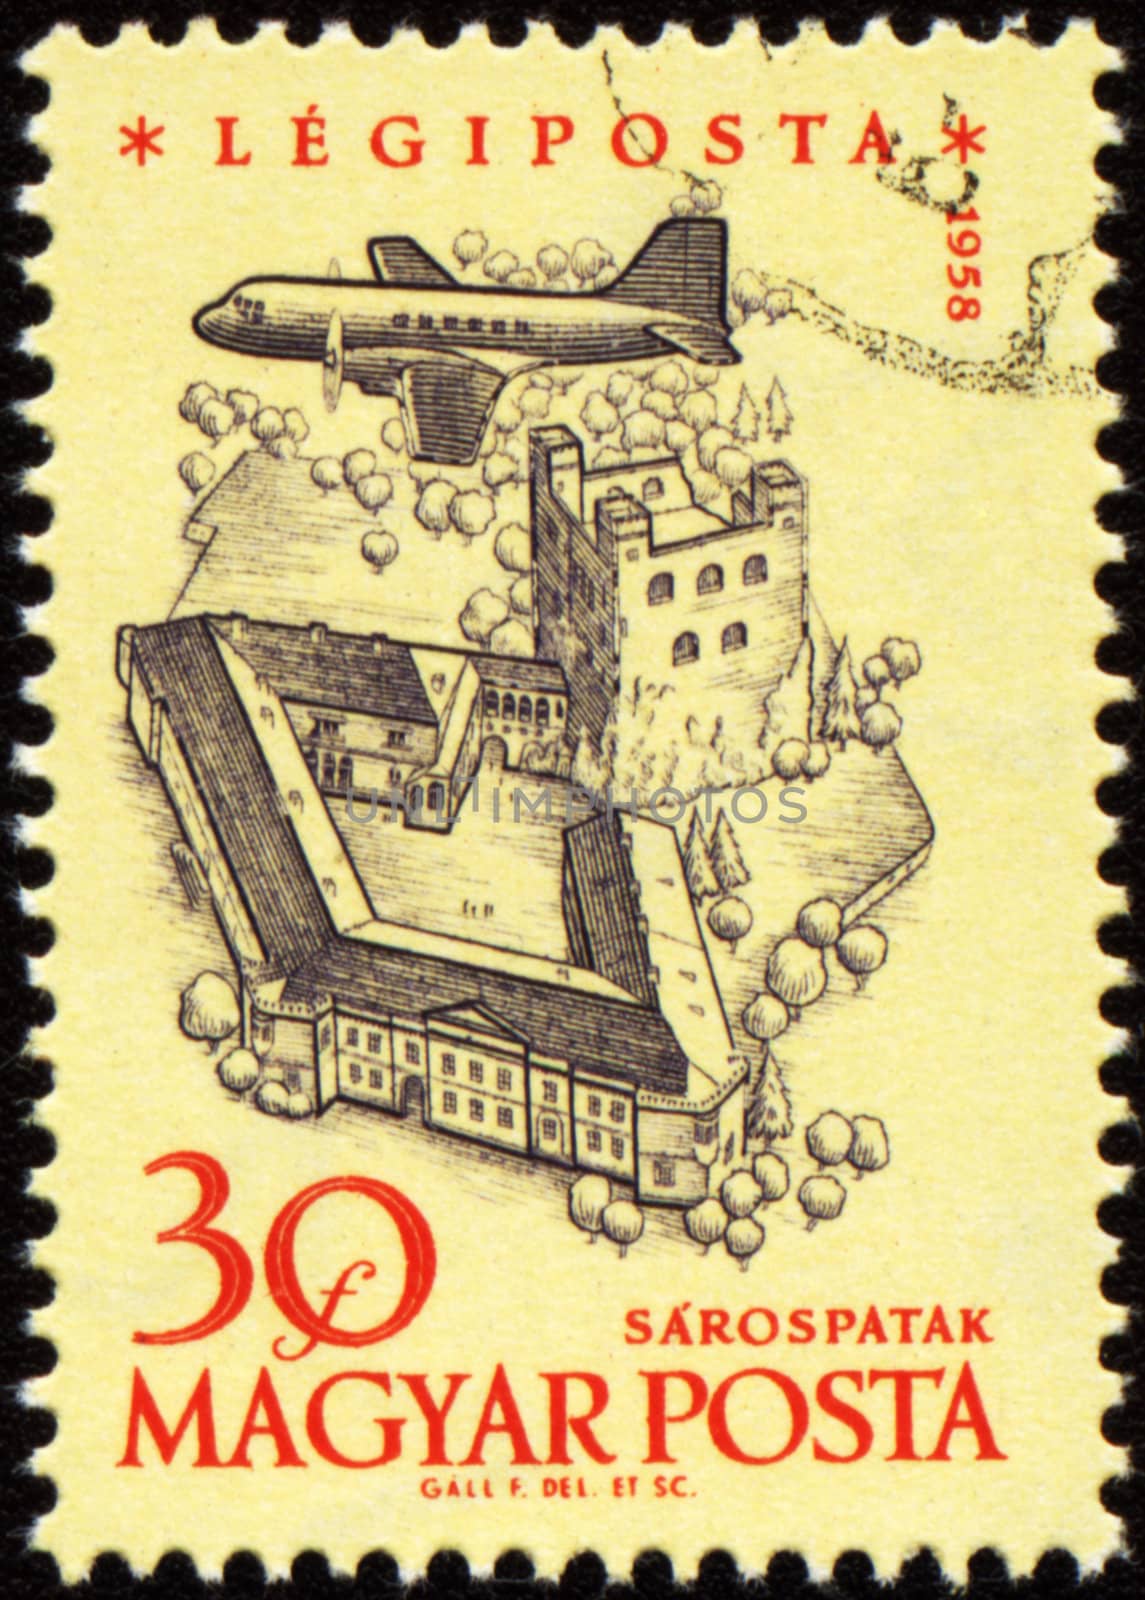 HUNGARY - CIRCA 1958: A stamp printed in Hungary shows flying plane over the medieval Sarospatak castle, series, circa 1958